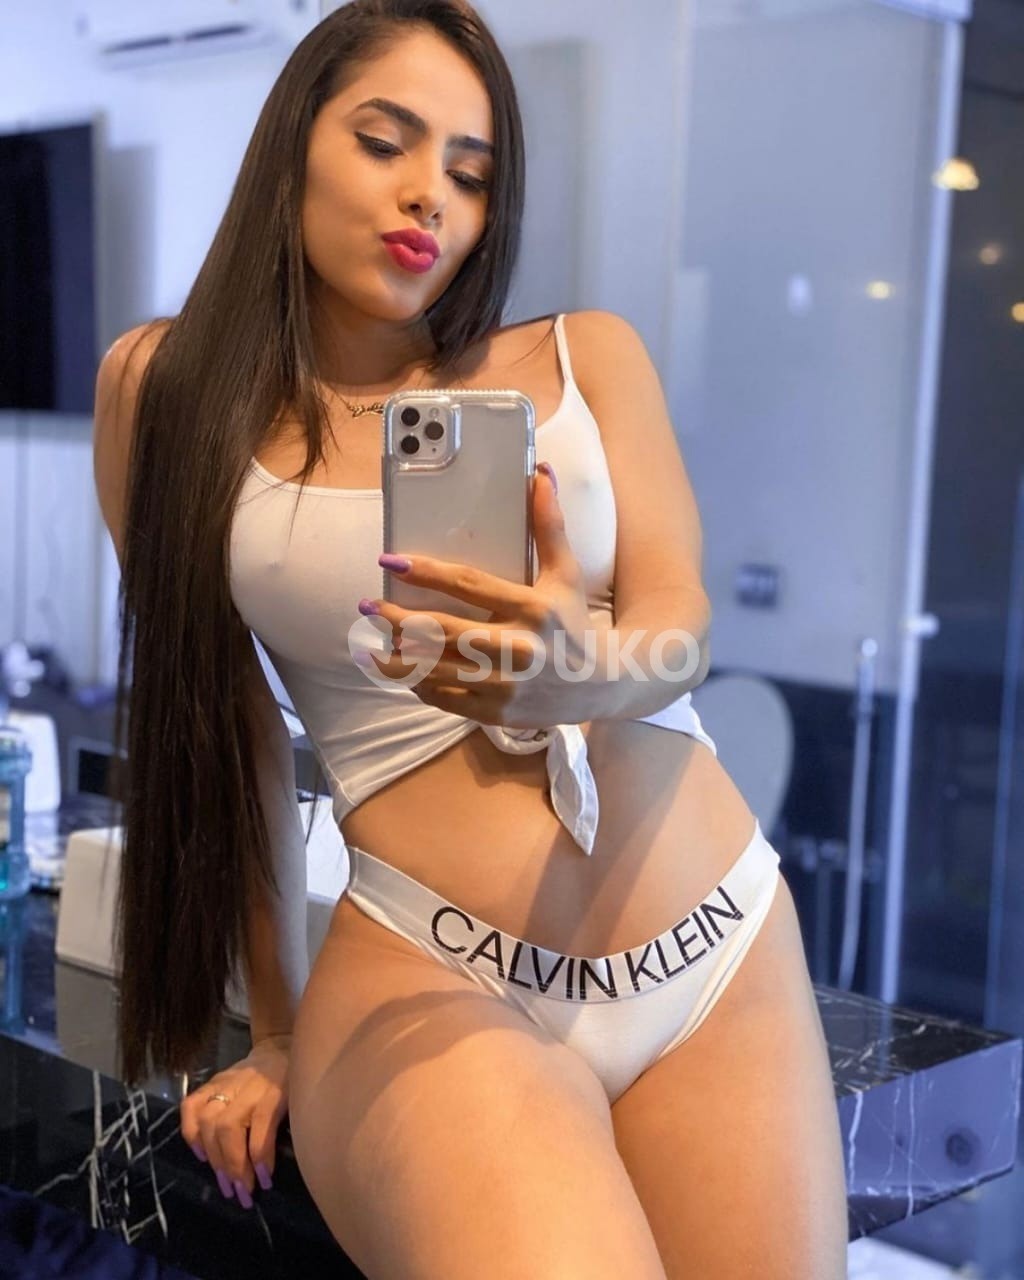 MANIKONDA 🌟 █▬█⓿▀█▀ 𝐆𝐈𝐑𝐋 𝐇𝐎𝐓 𝐀𝐍𝐃 𝐒𝐄XY GIRLS AND HOUSEWIFE AVAILABL